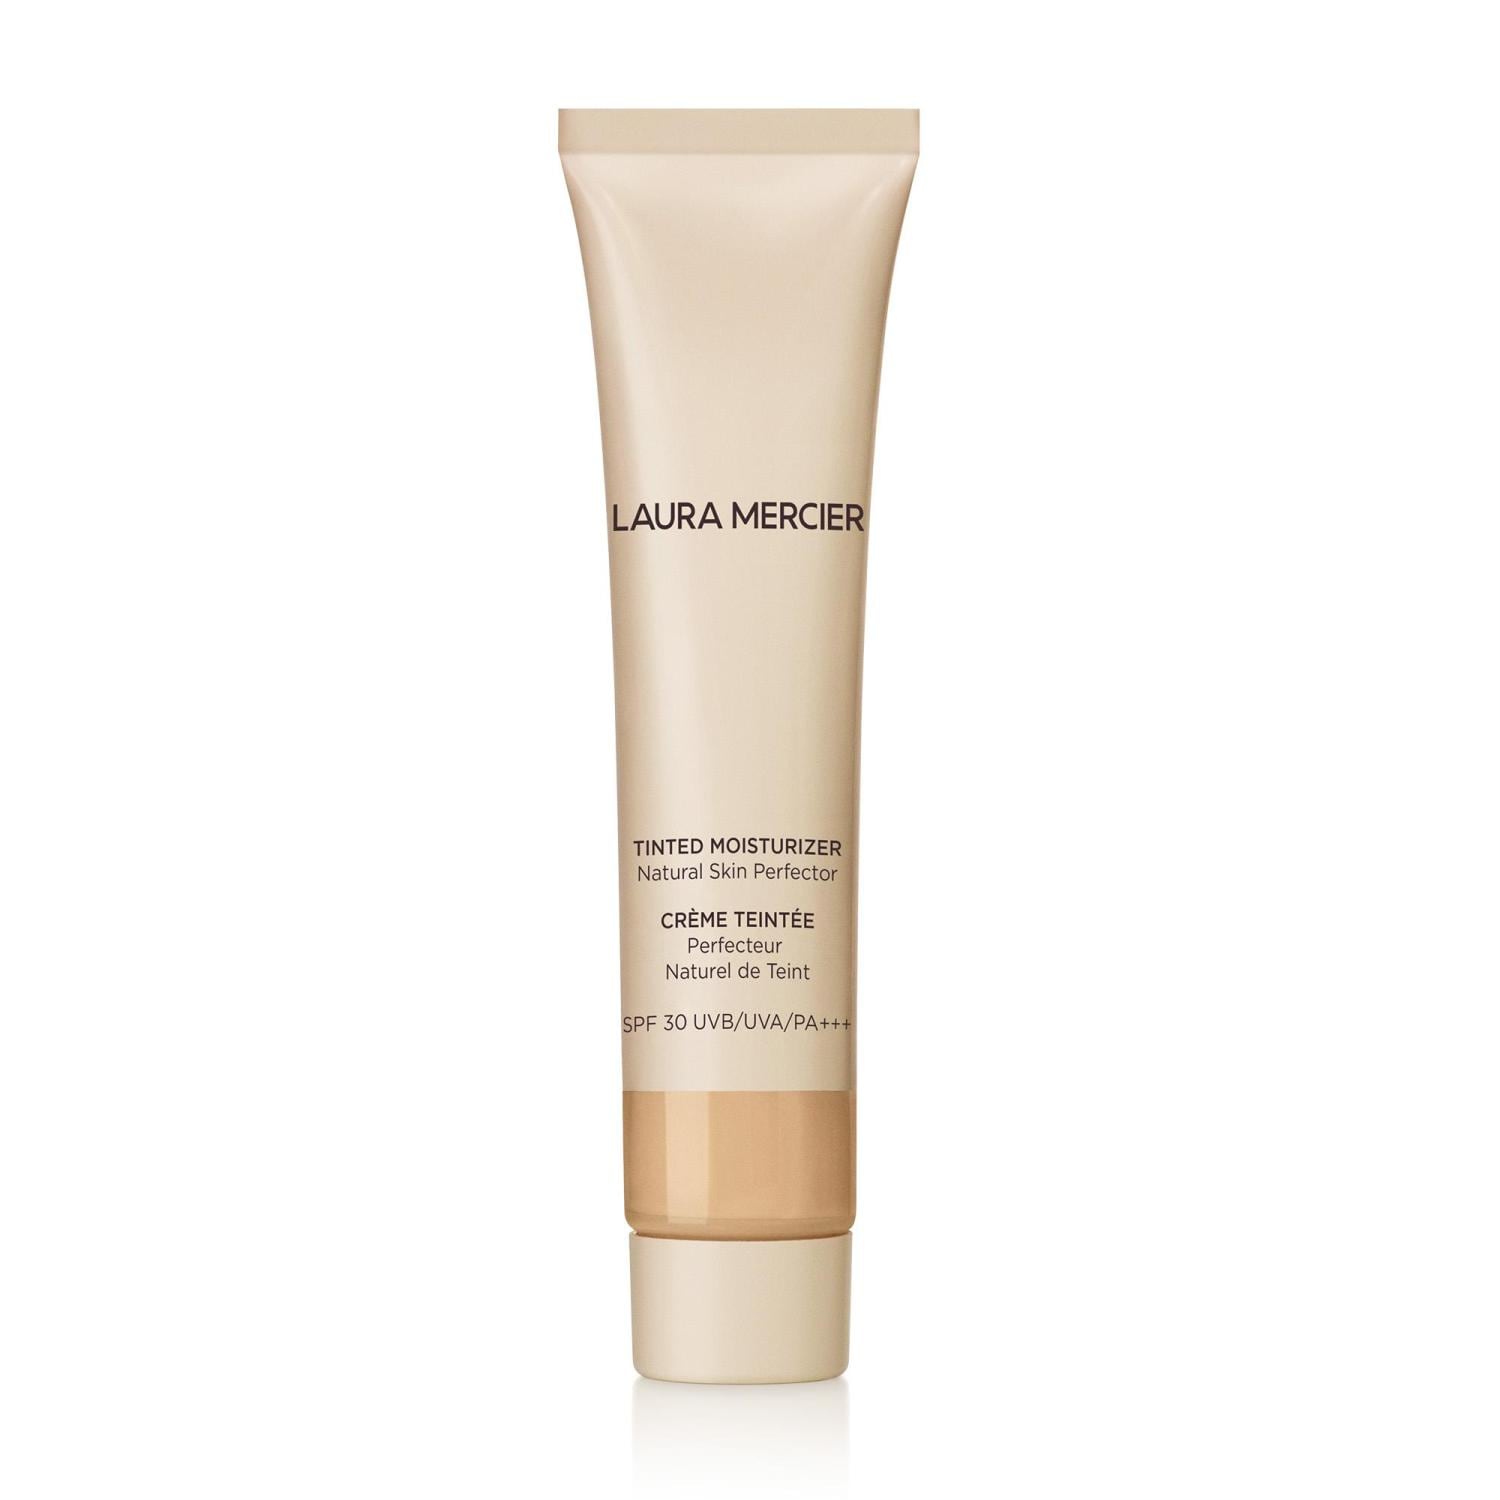 Laura Mercier Beauty To Go Travel Size - Tinted Moisturizer Natural Skin Perfector SPF 30, Nr. 2W1 - NATURA